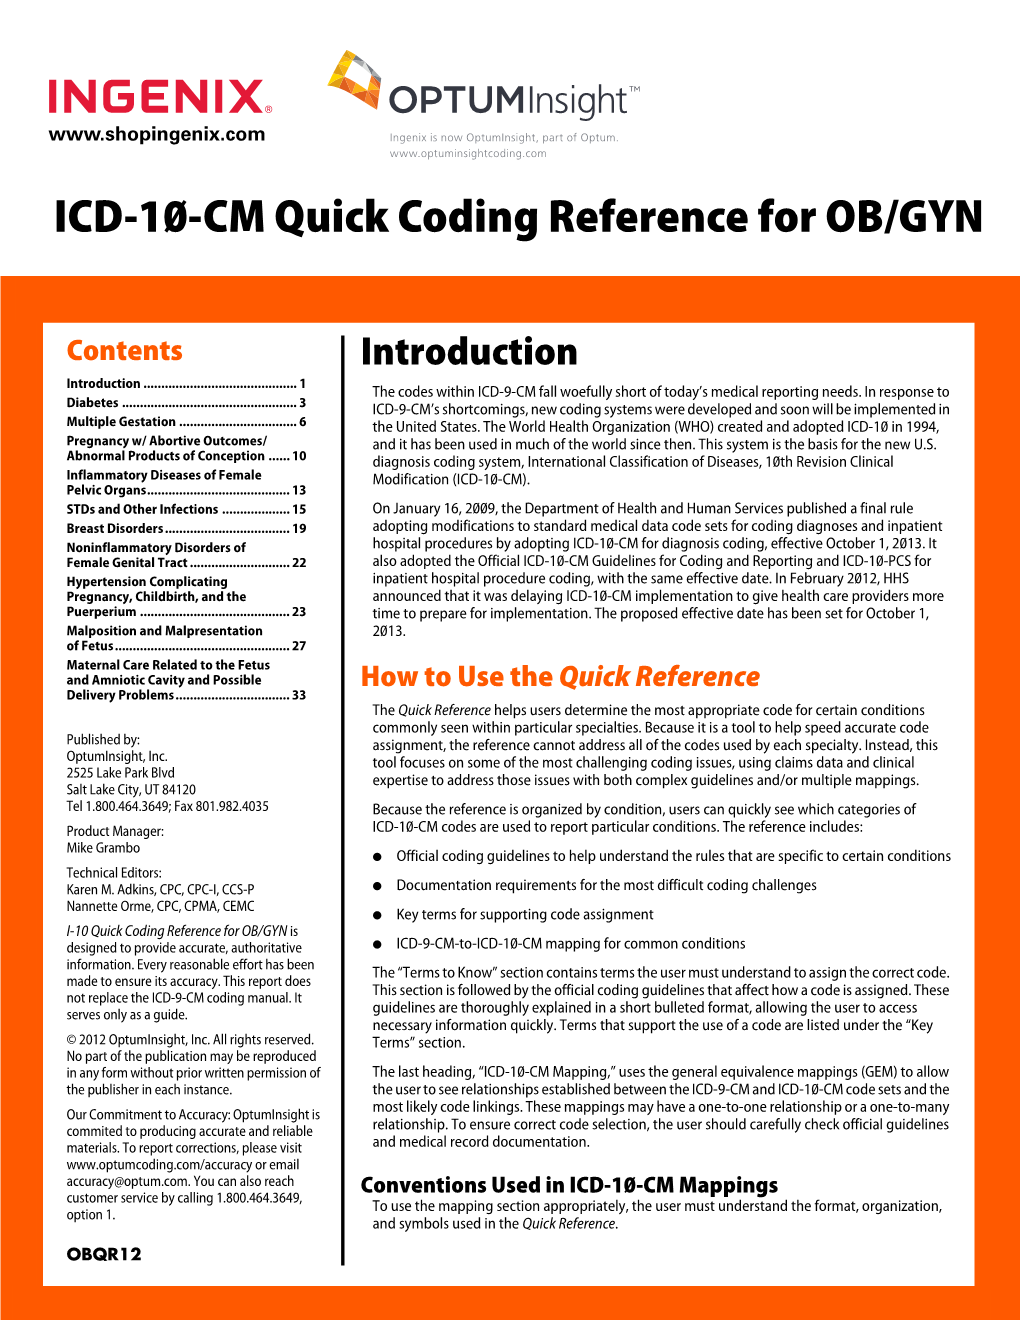 ICD-10-CM Quick Coding Reference for OB/GYN